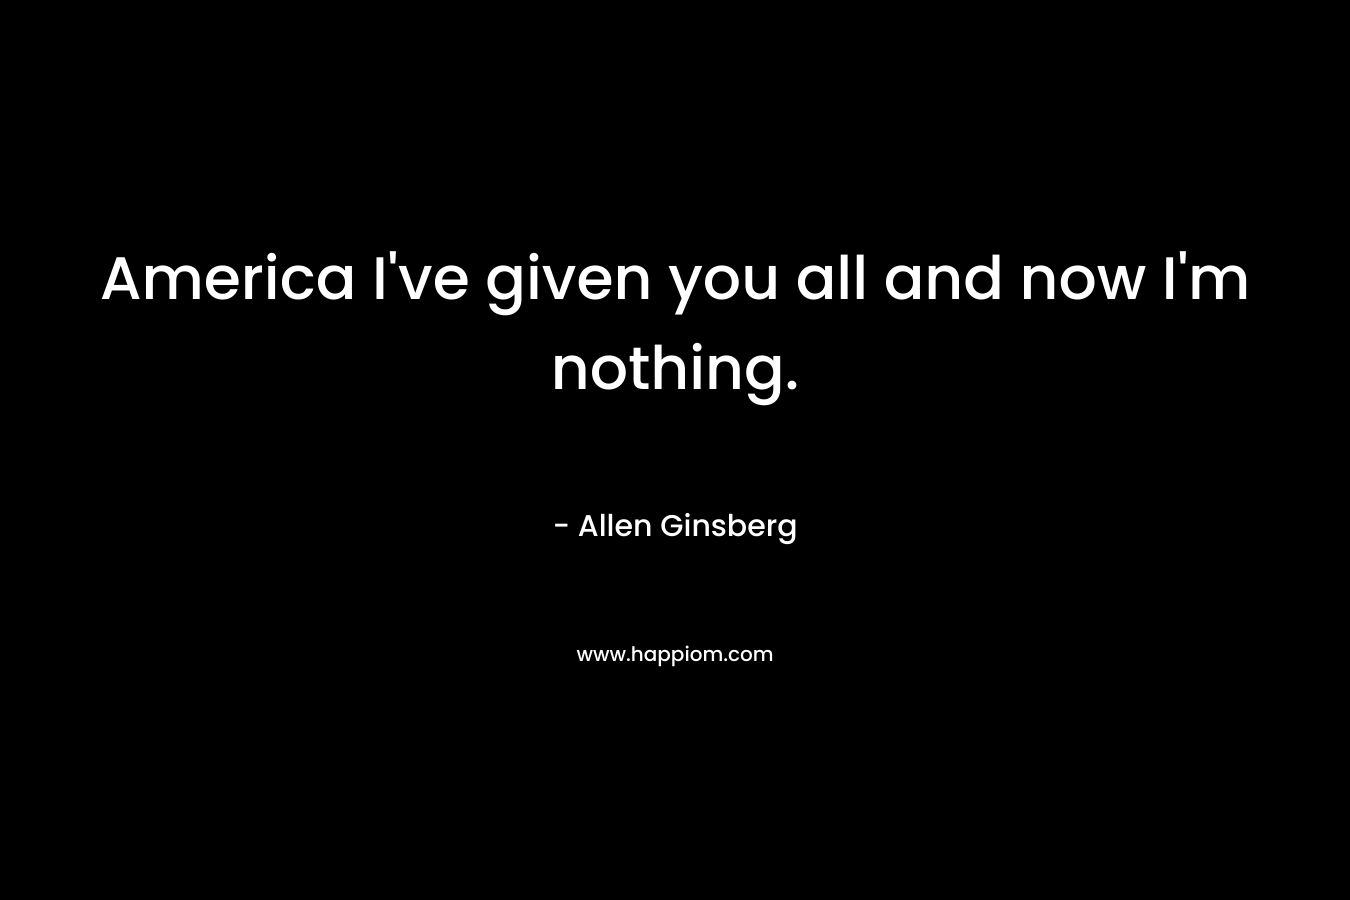 America I’ve given you all and now I’m nothing. – Allen Ginsberg